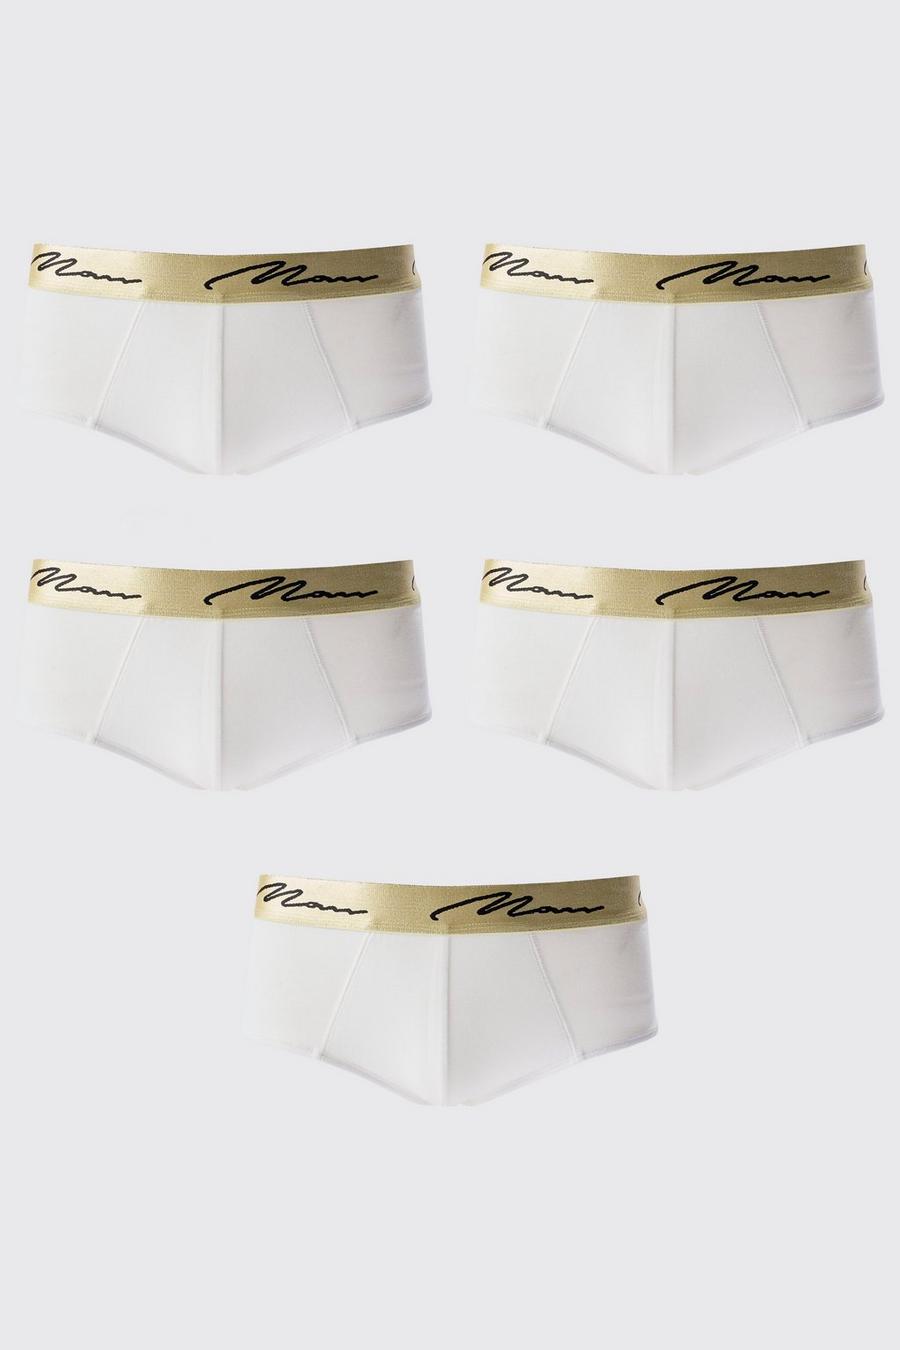 White Man Signature Briefs med midjeband i guld (5-pack)